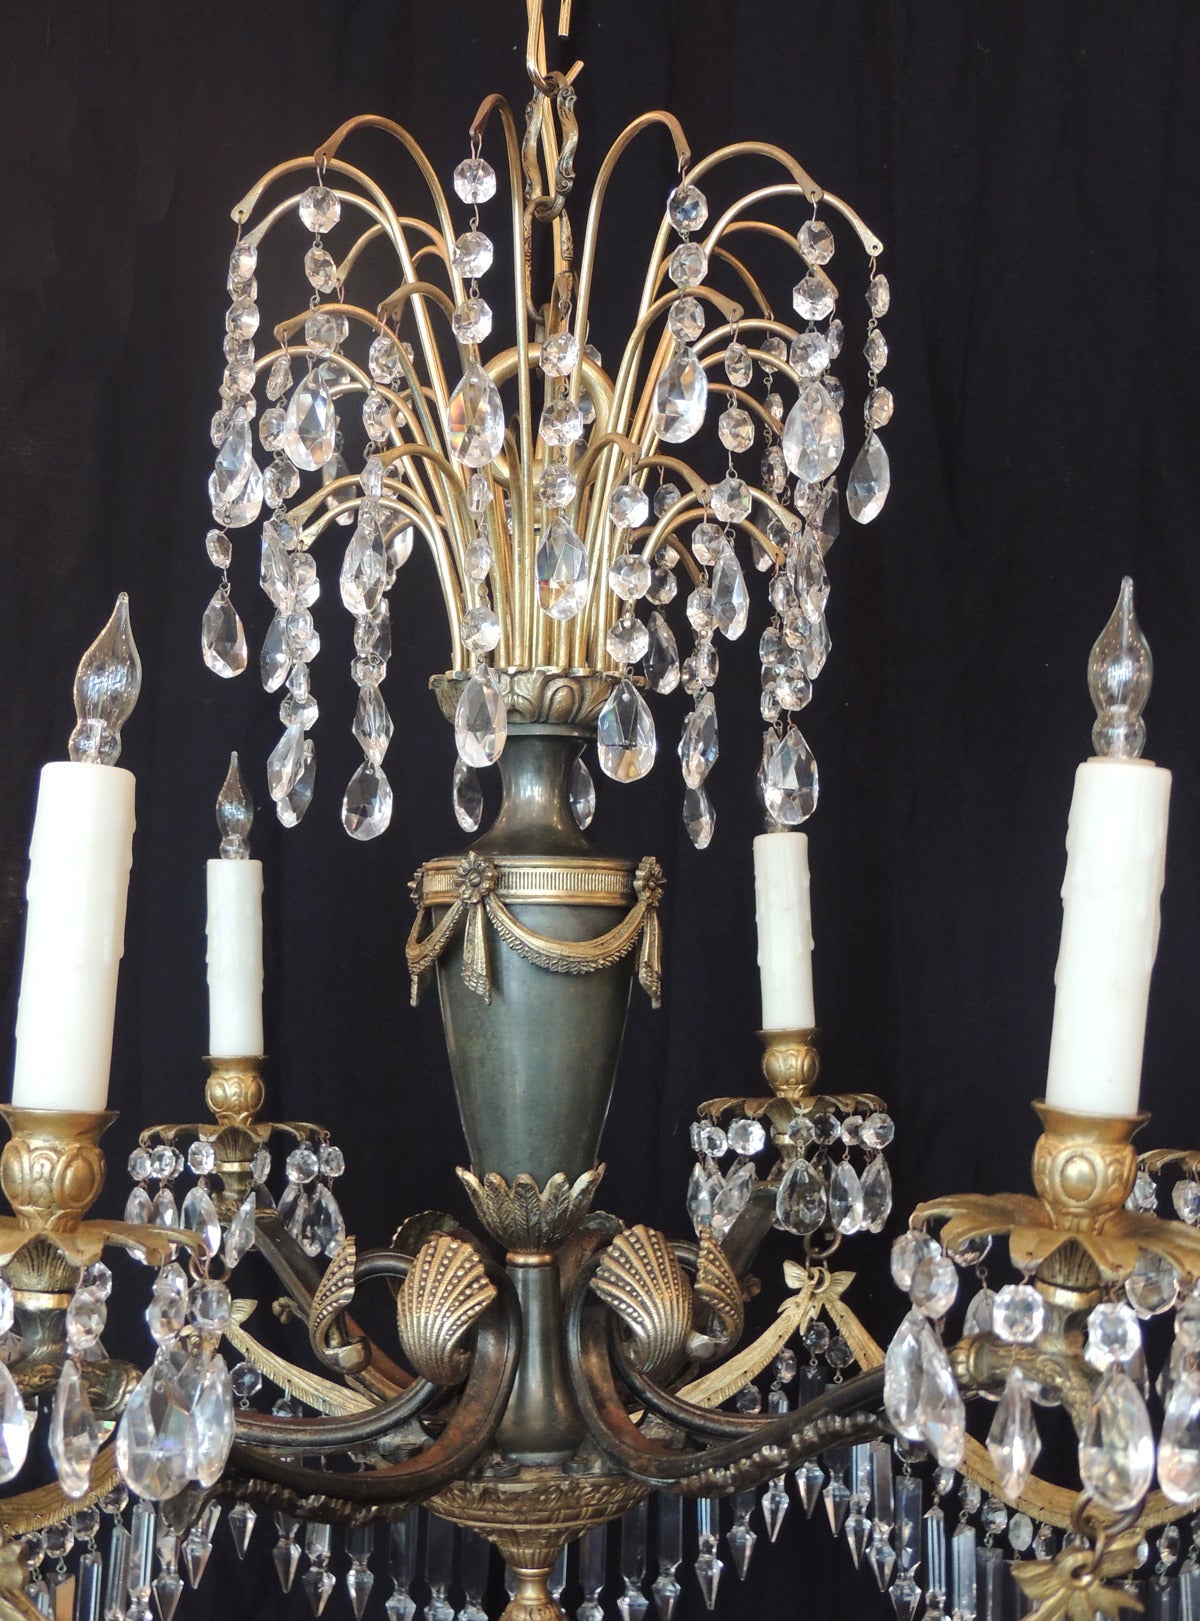 This chandelier was made in Italy during the early half of the 20th century, circa 1920, and features a top decorative piece with waterfall layers bronze arms with several crystal prisms hanging from each end. The main shaft is decorated with bronze